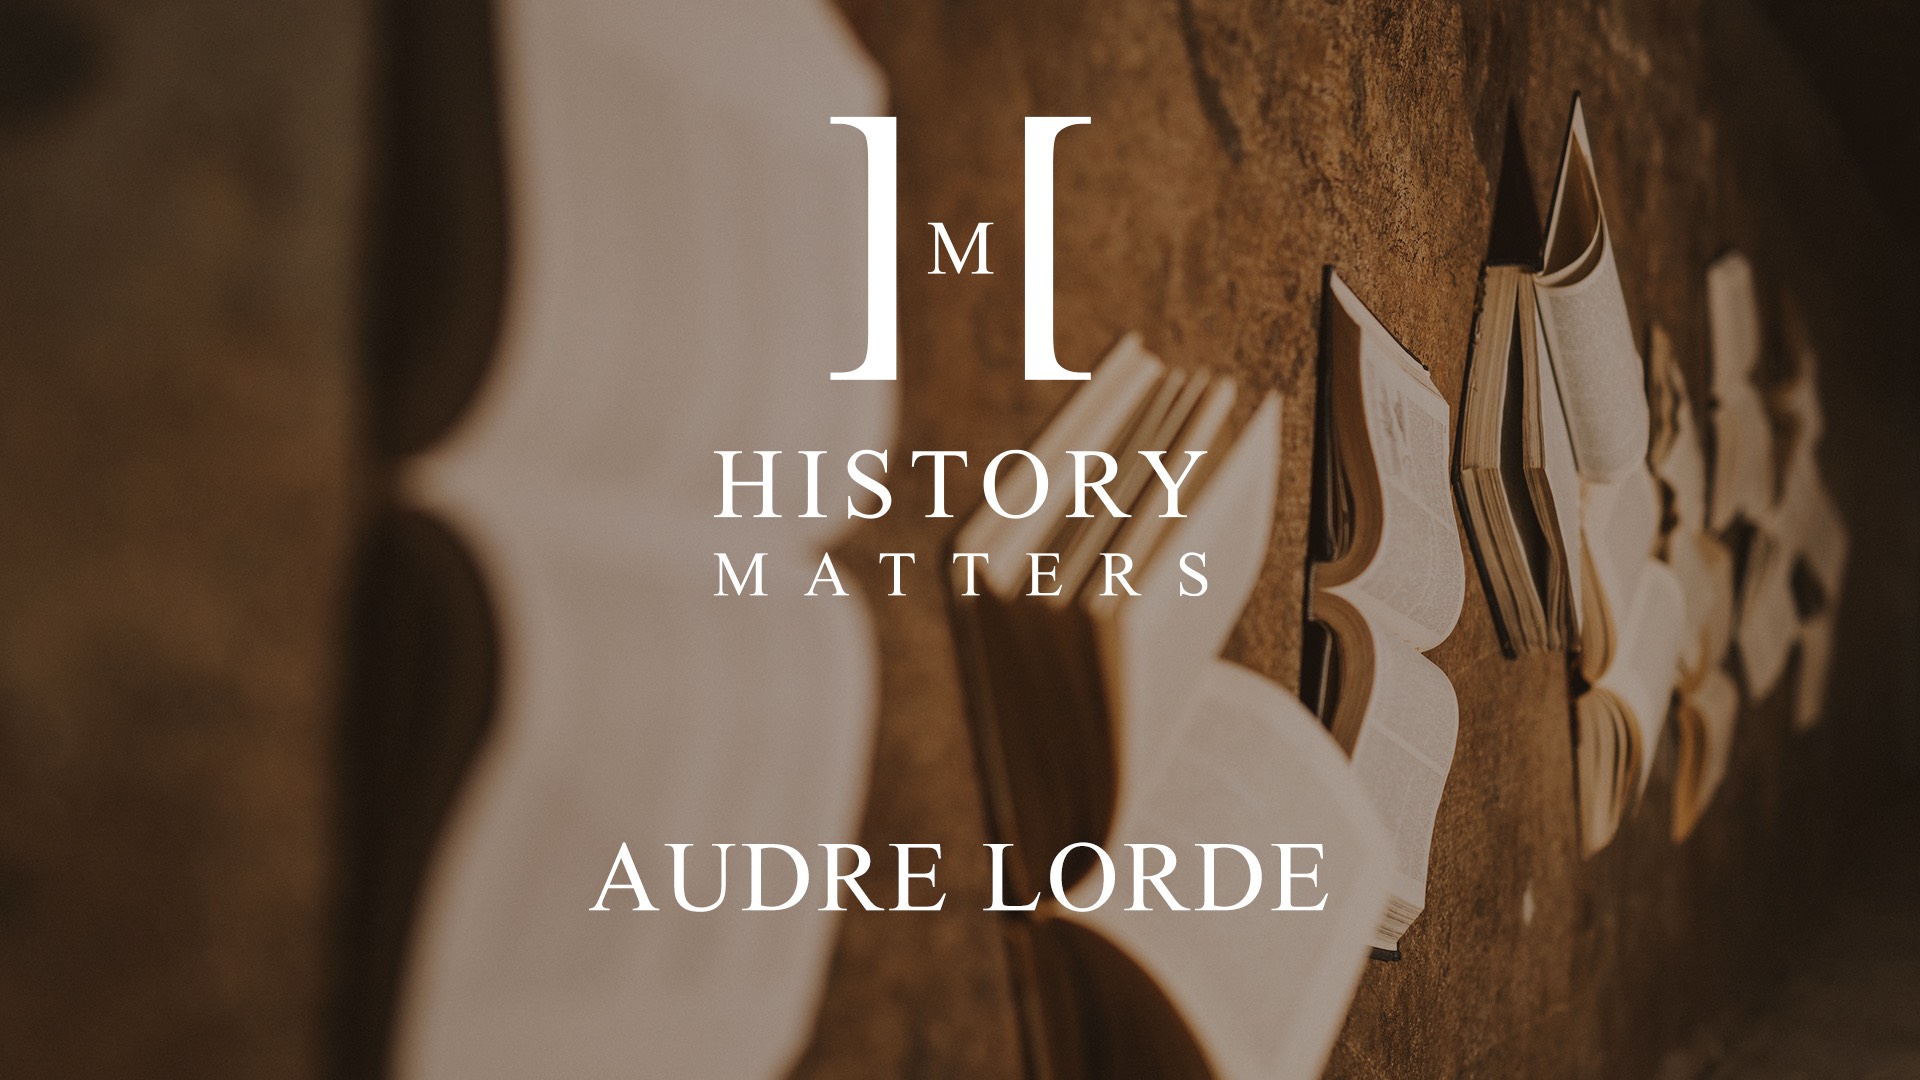 History matters Audre Lorde